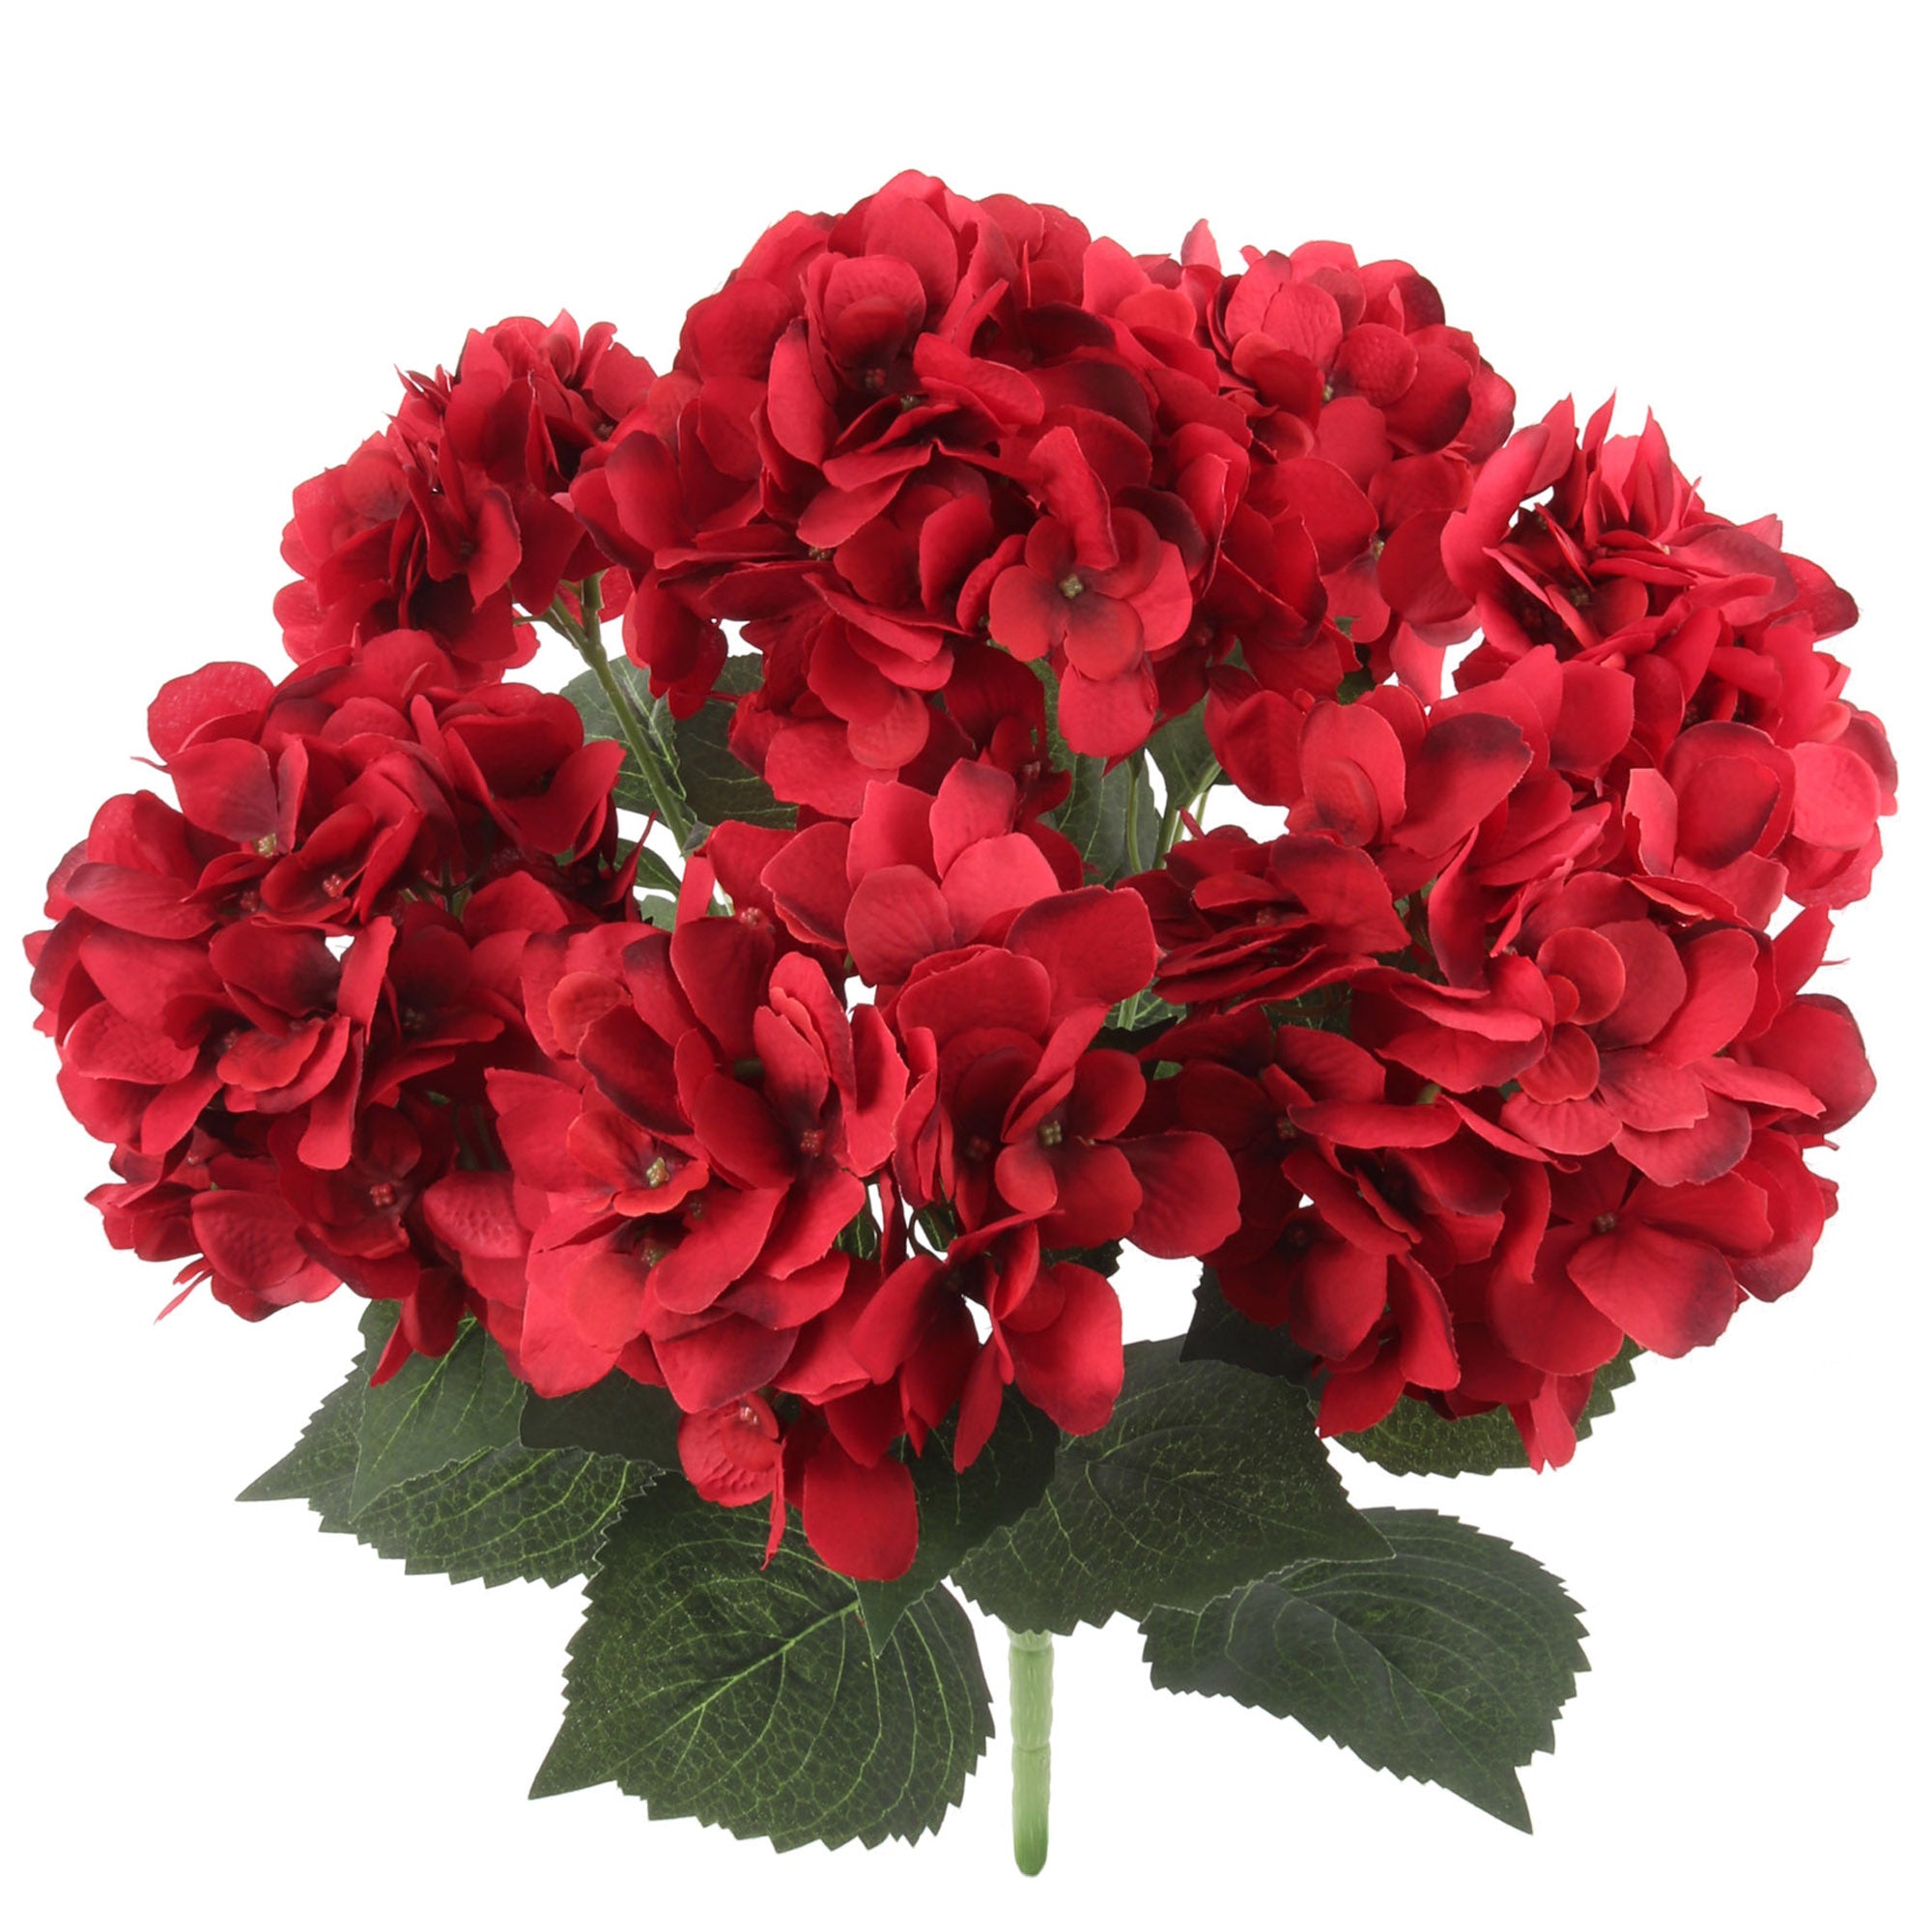 Alluring 20" Red Hydrangea Bush - Luxurious Faux Flowers for Home Decor, Striking Wedding Centerpieces & Dazzling Displays